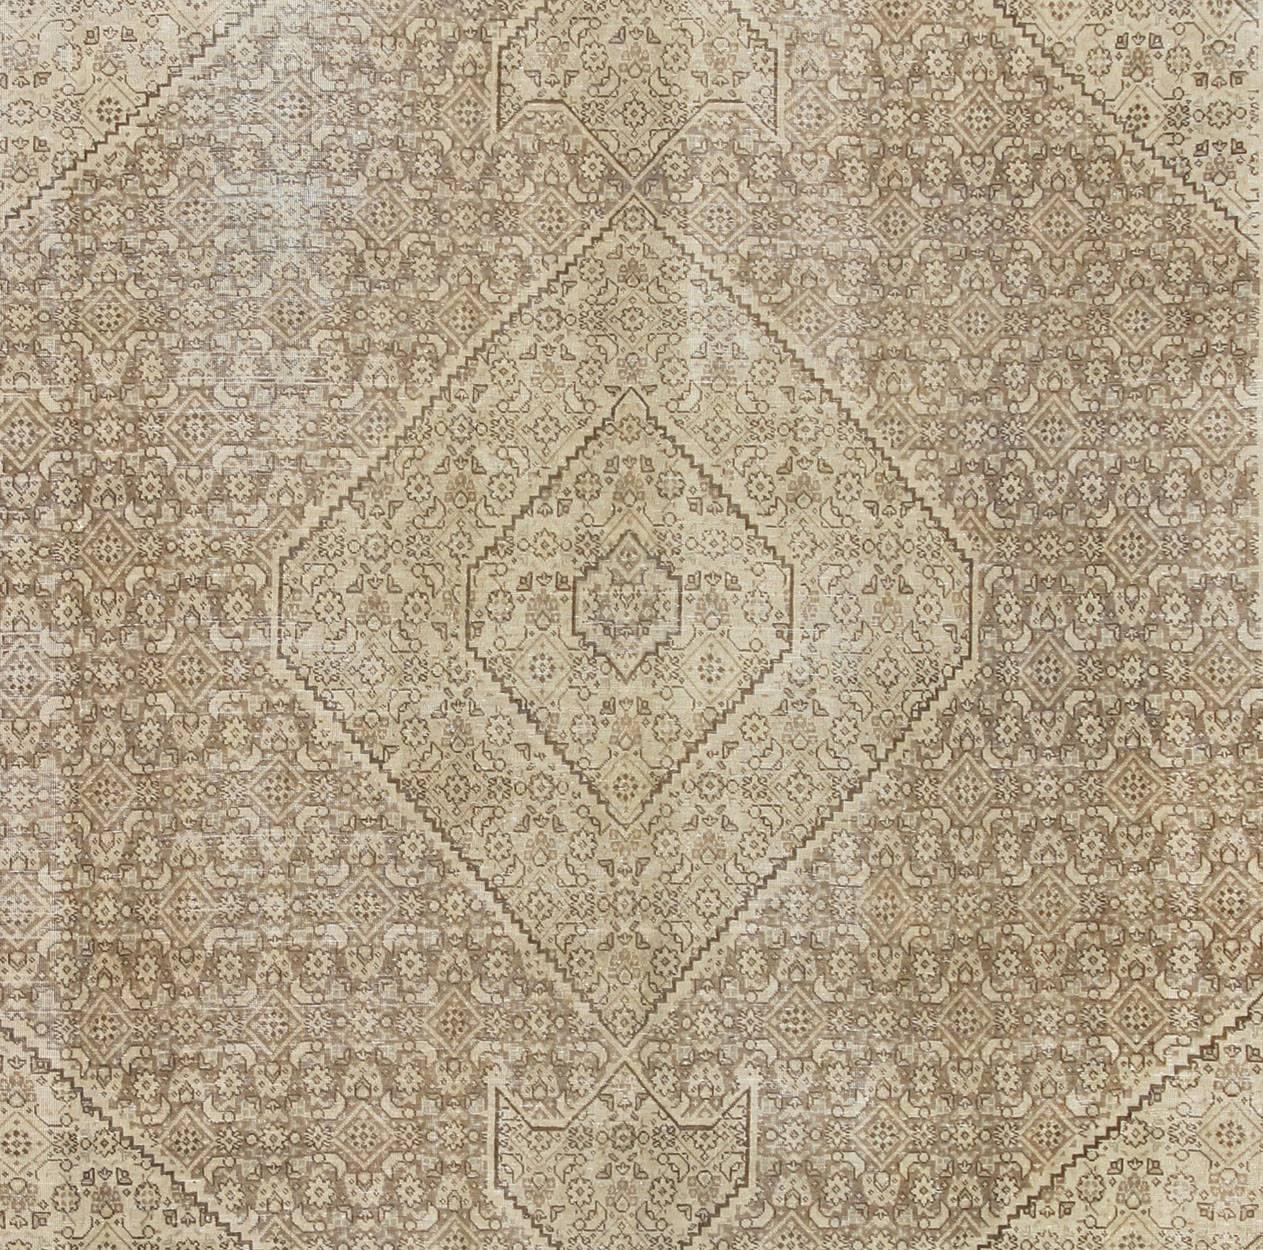 Turkish Antique Persian Tabriz Rug with Medallion in Brown, Tan, Taupe and Neutrals